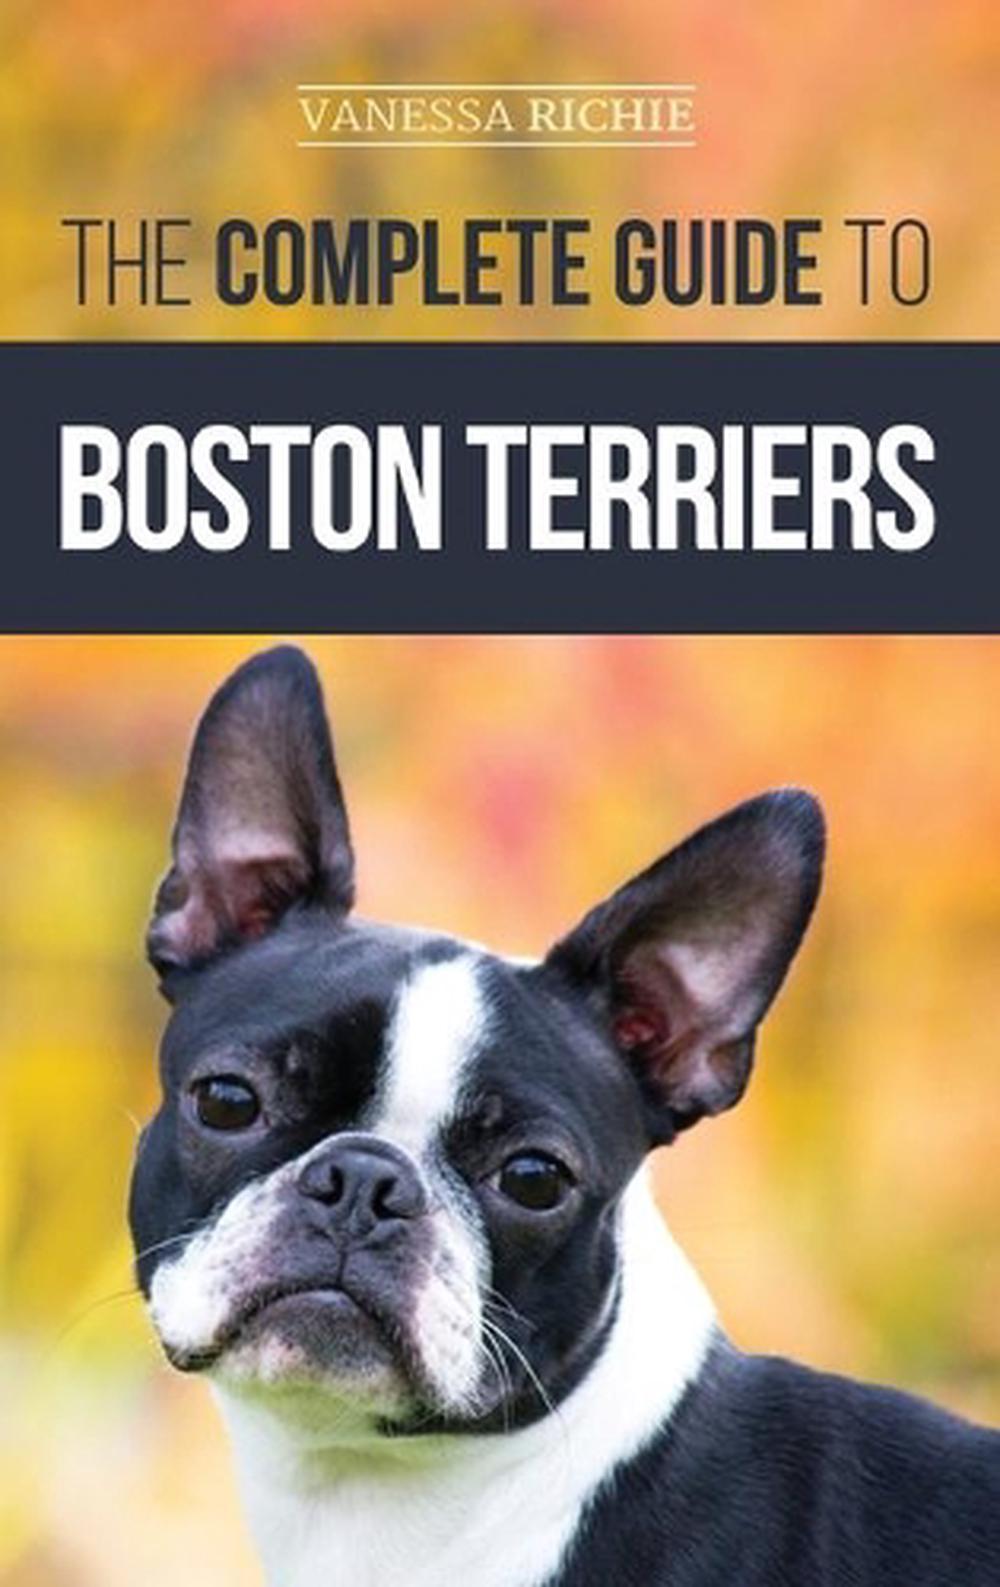 The Complete Guide to Boston Terriers Preparing for